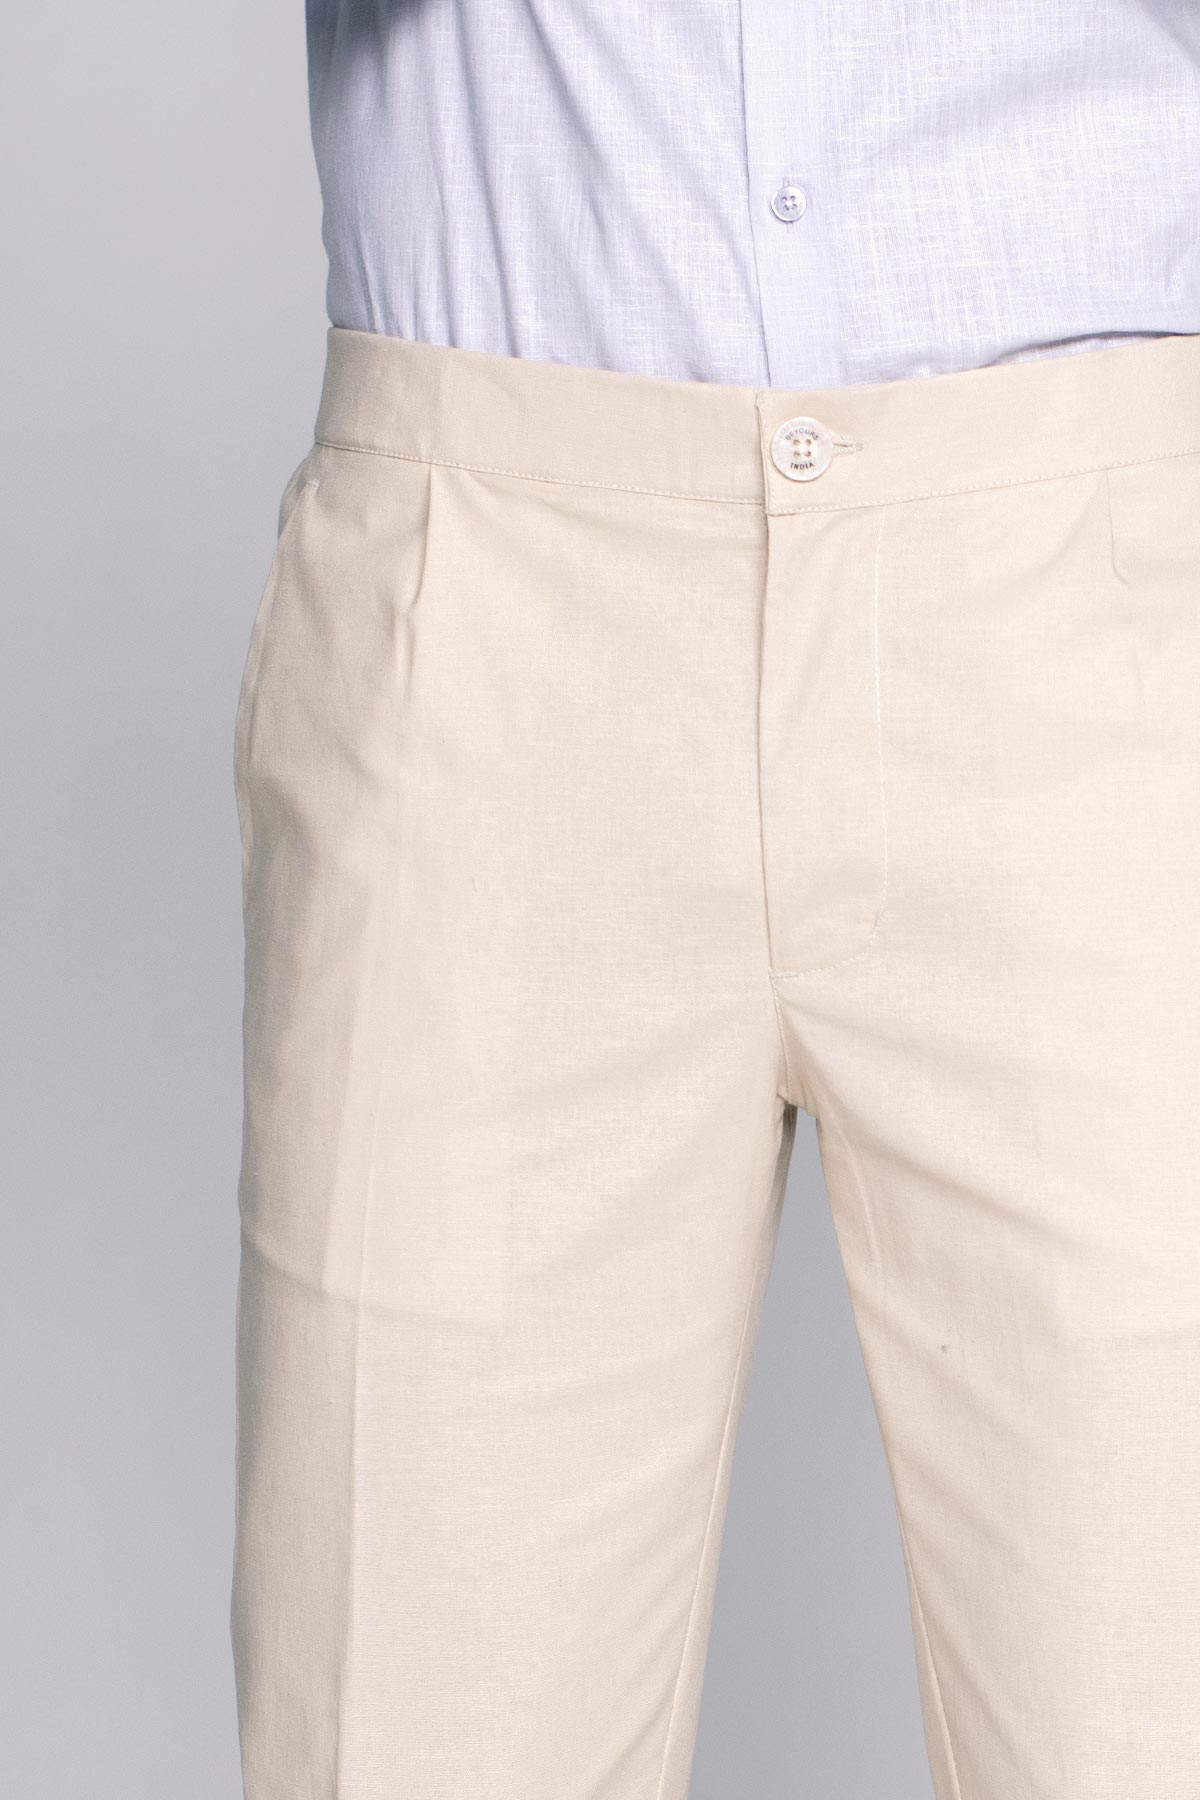 Easy Linen Smooth Beige Trouser Beyours Essentials Private Limited